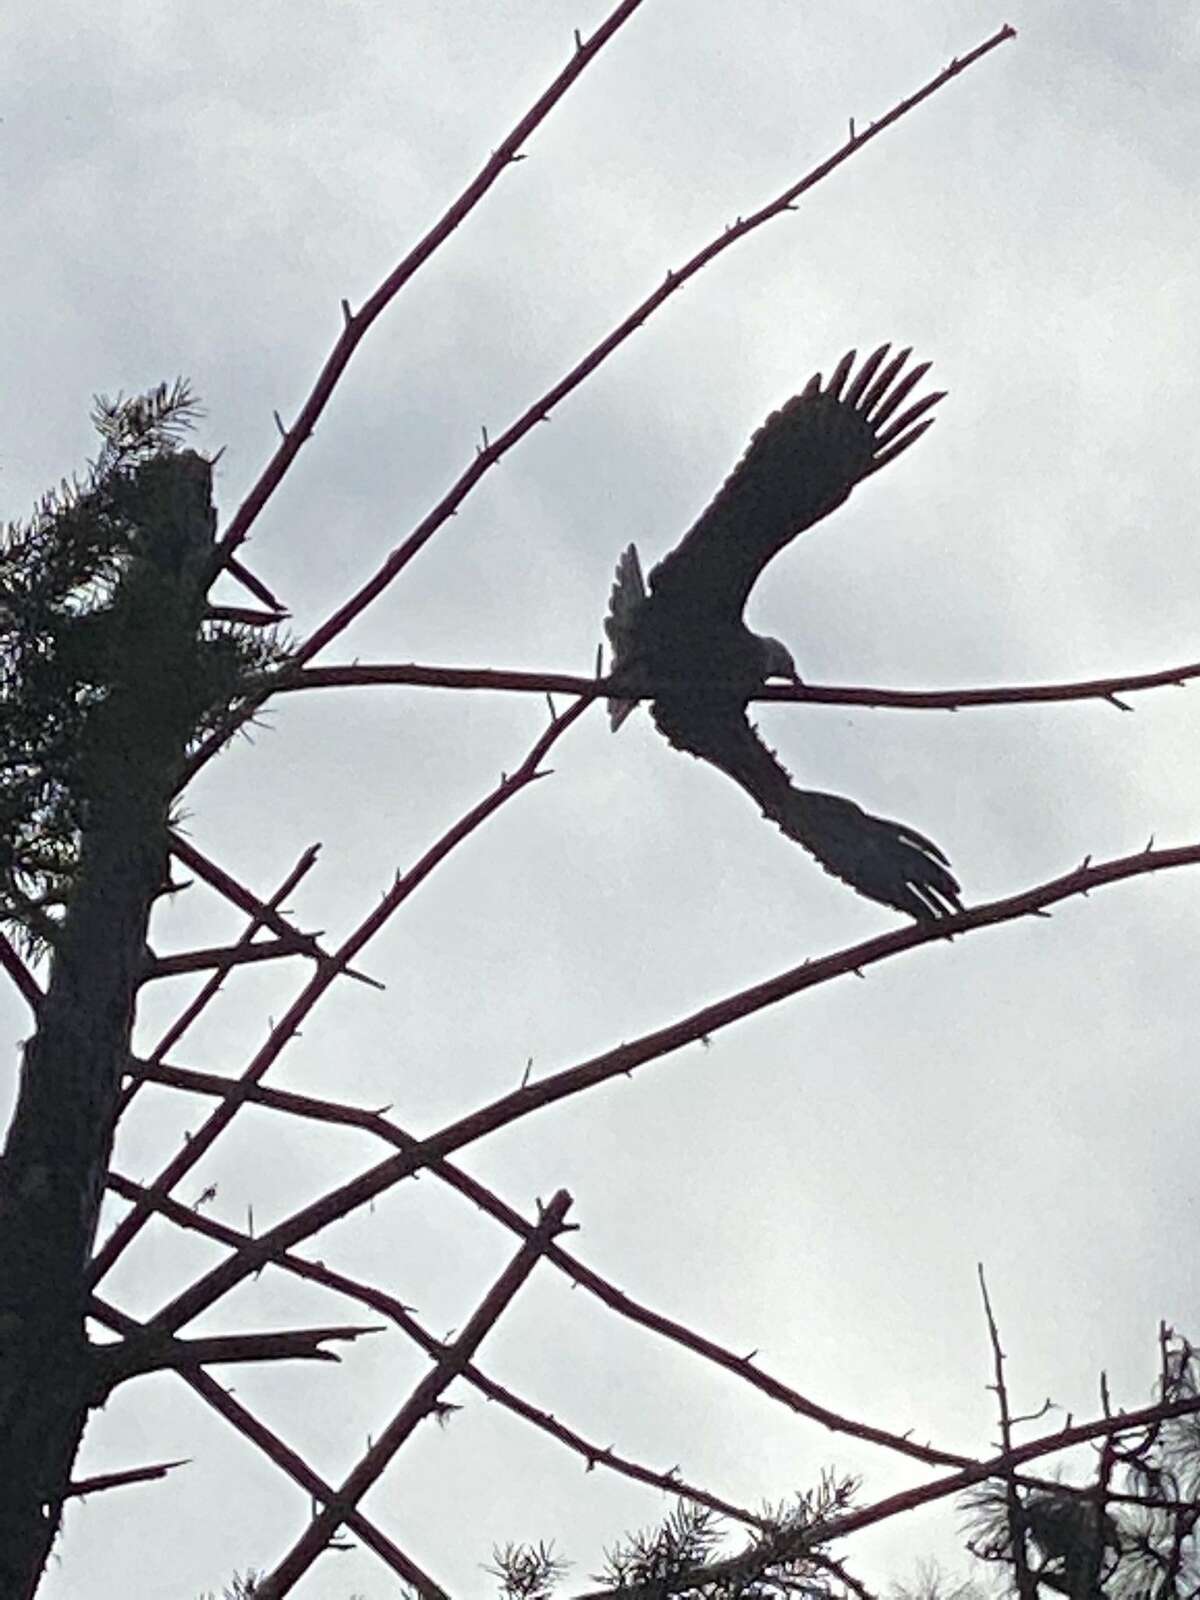 A bald eagle flies near a tree in Potter Valley. A permit issued by the U.S. Fish and Wildlife Service that would’ve allowed PG&E to cut down a Mendocino County tree with a bald eagle’s nest in it.